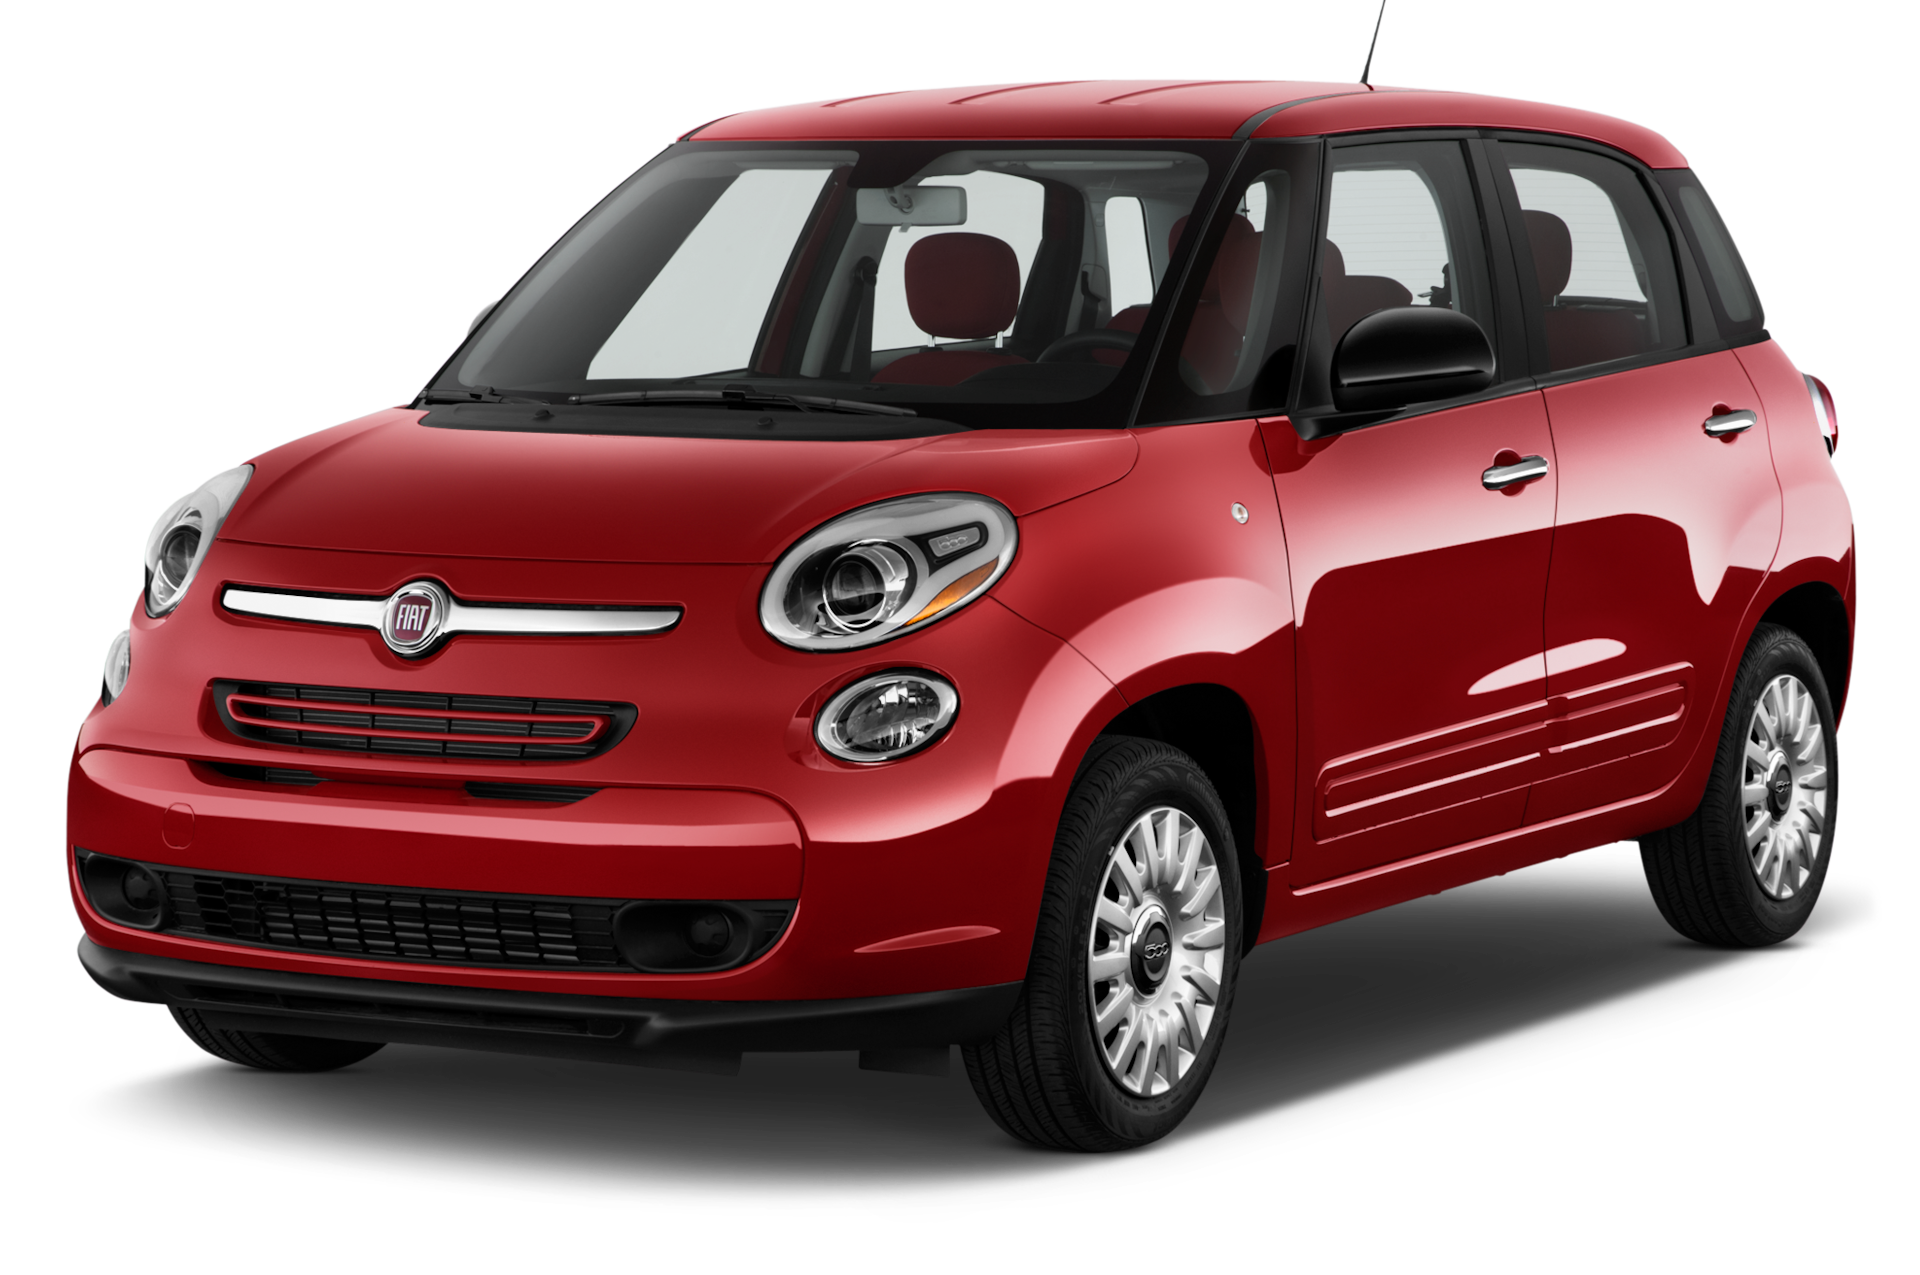 2017 FIAT 500L Prices, Reviews, and Photos - MotorTrend